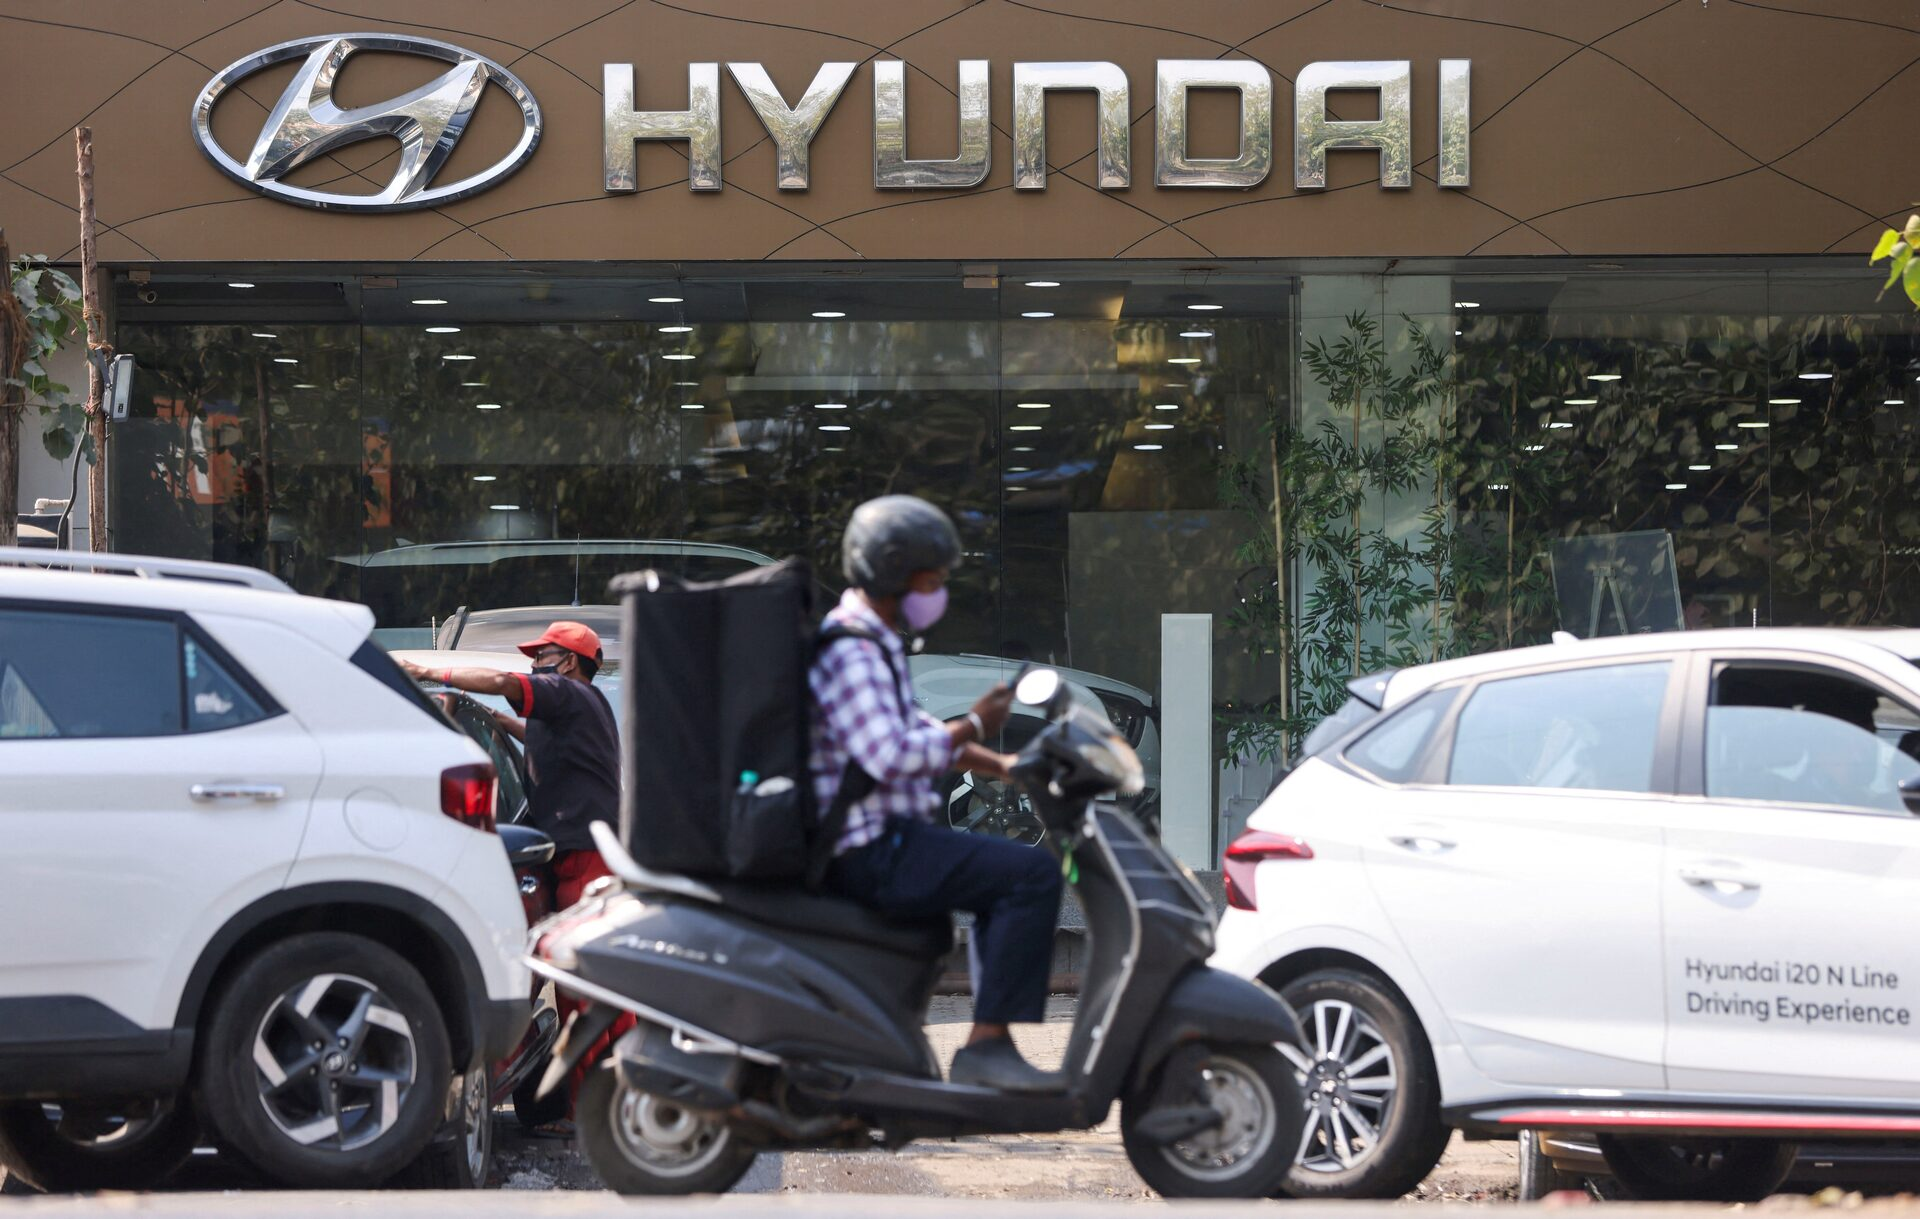 Hyundai deepens India bet, files for IPO that could be country's biggest